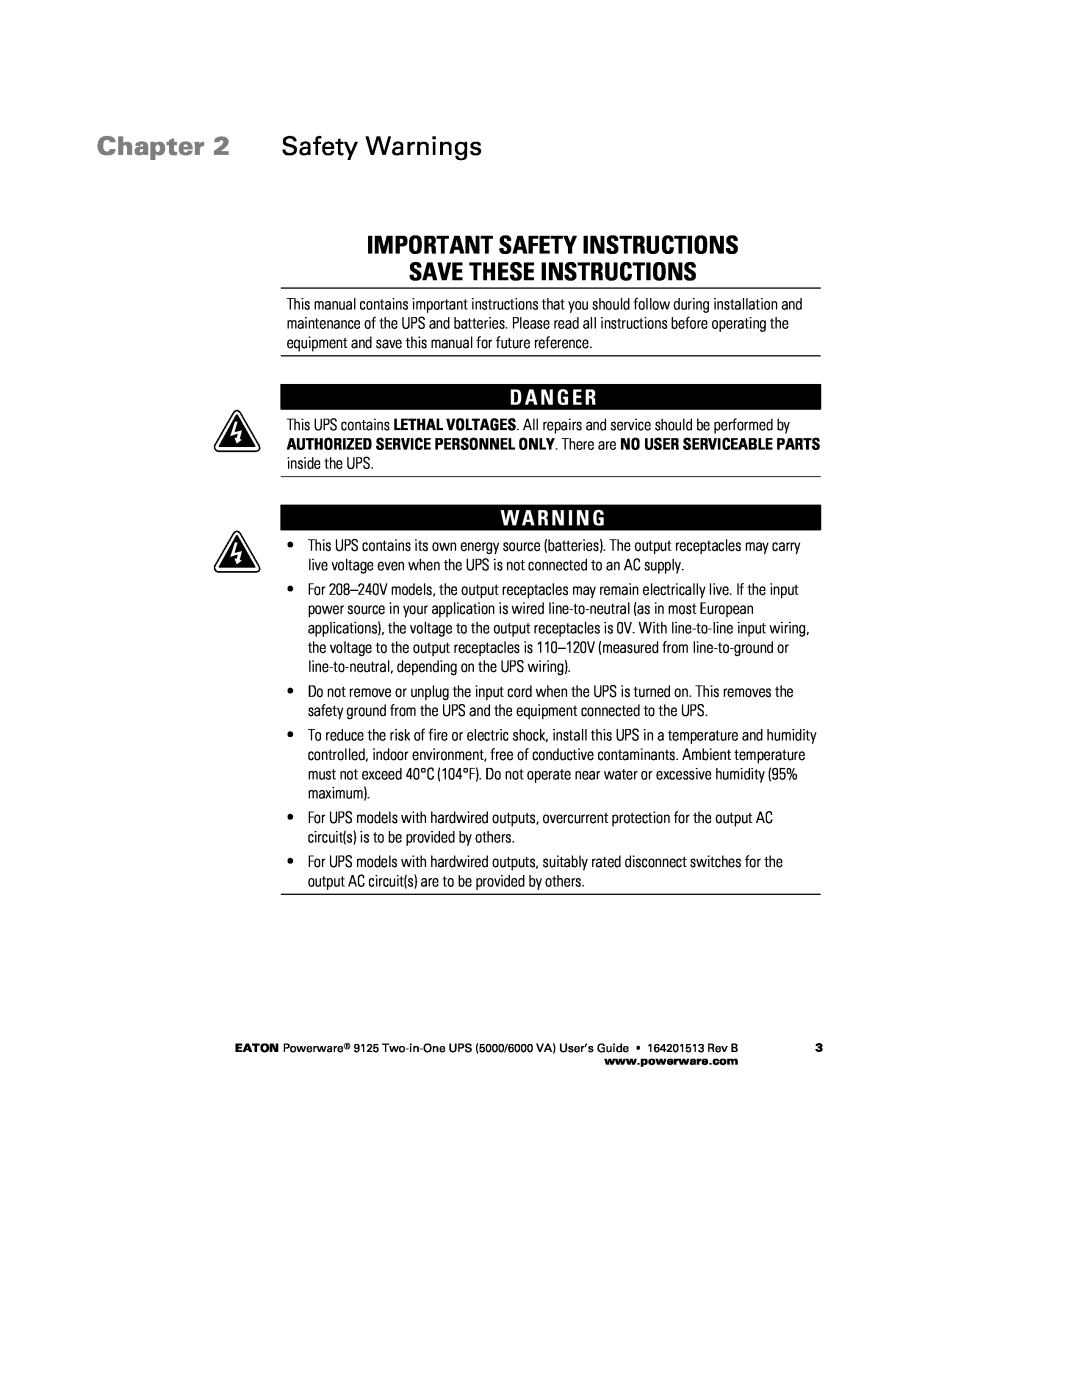 Powerware 6000 VA, 5000 Safety Warnings, Important Safety Instructions Save These Instructions, D A N G E R, W A R N I N G 